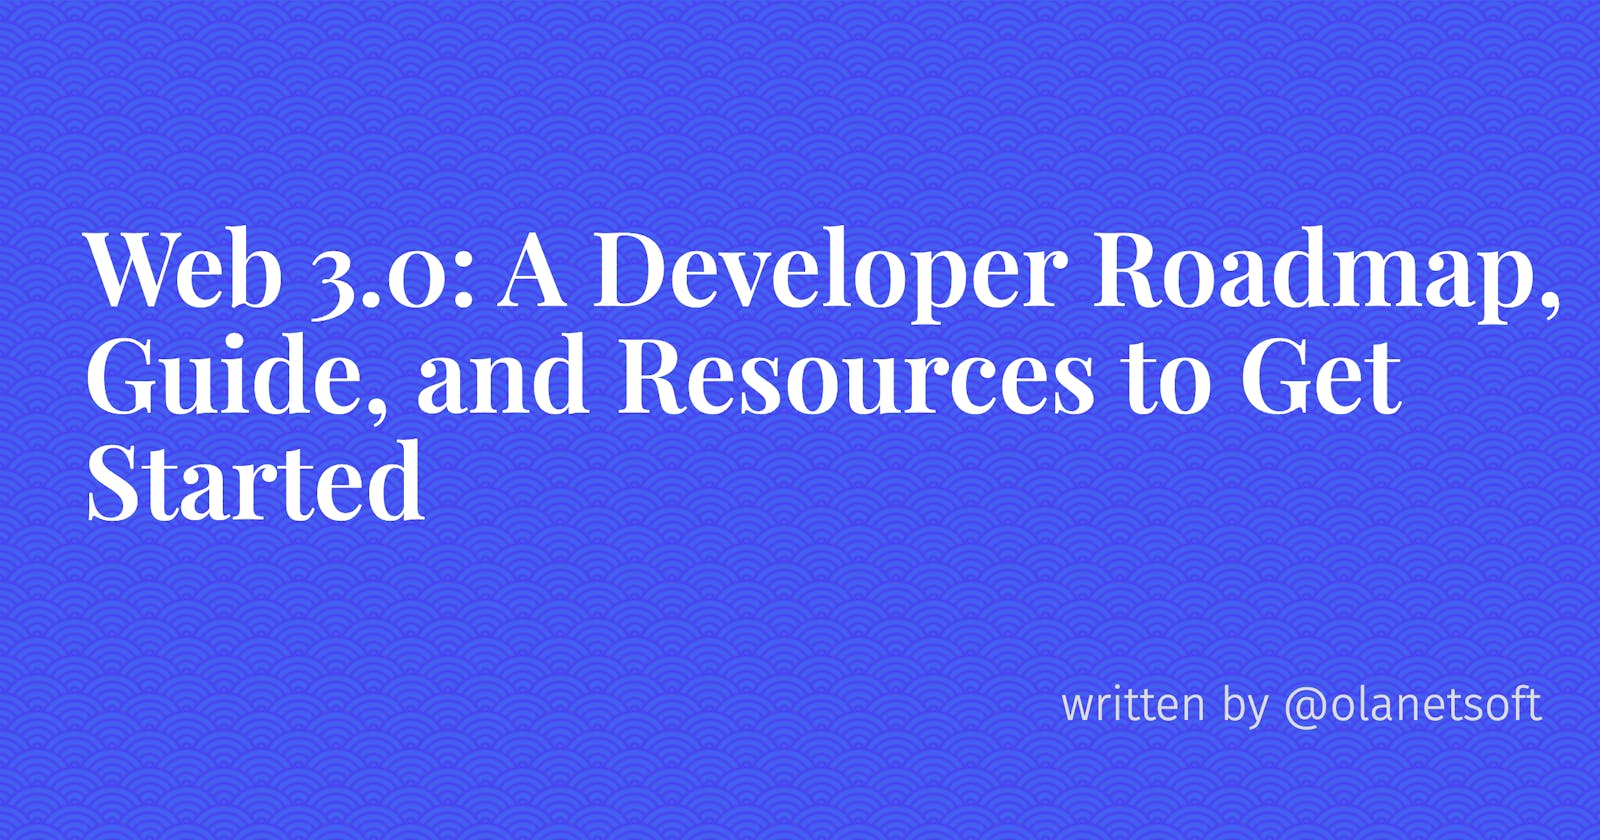 Web 3.0: A Developer Roadmap, Guide, and Resources to Get Started